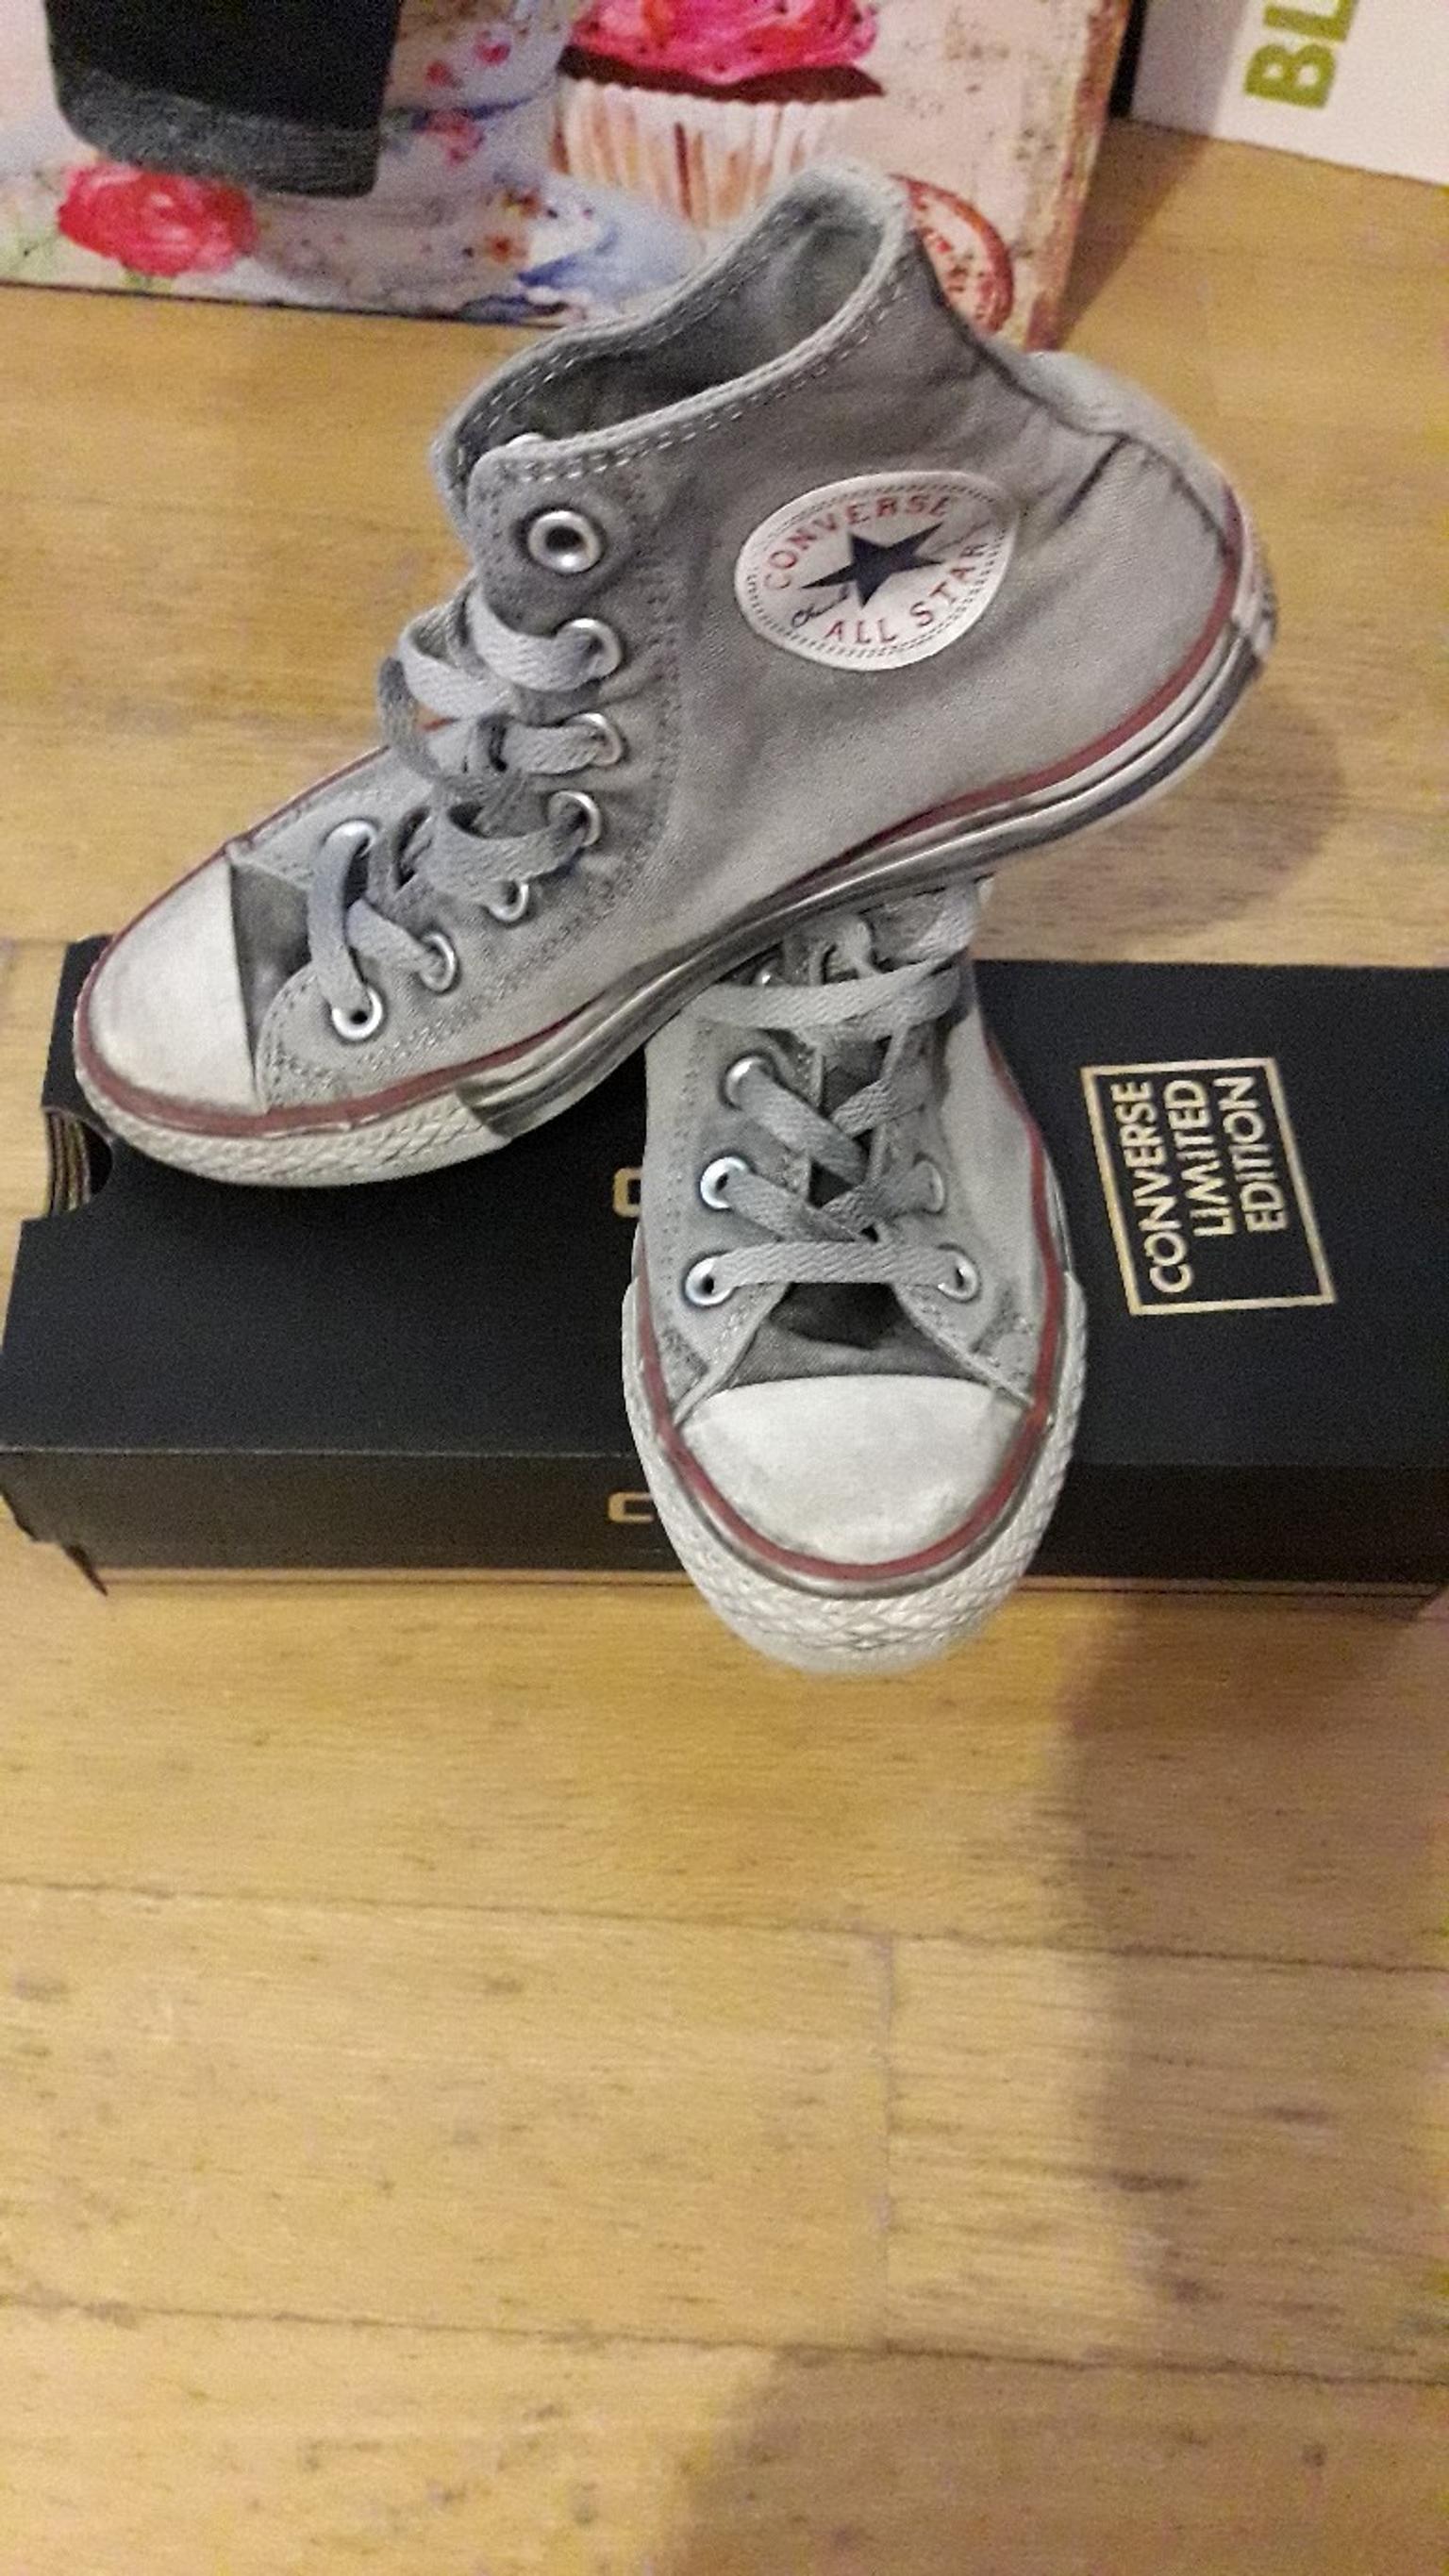 Converse All star limited edition in 58022 Follonica for €60.00 for sale |  Shpock